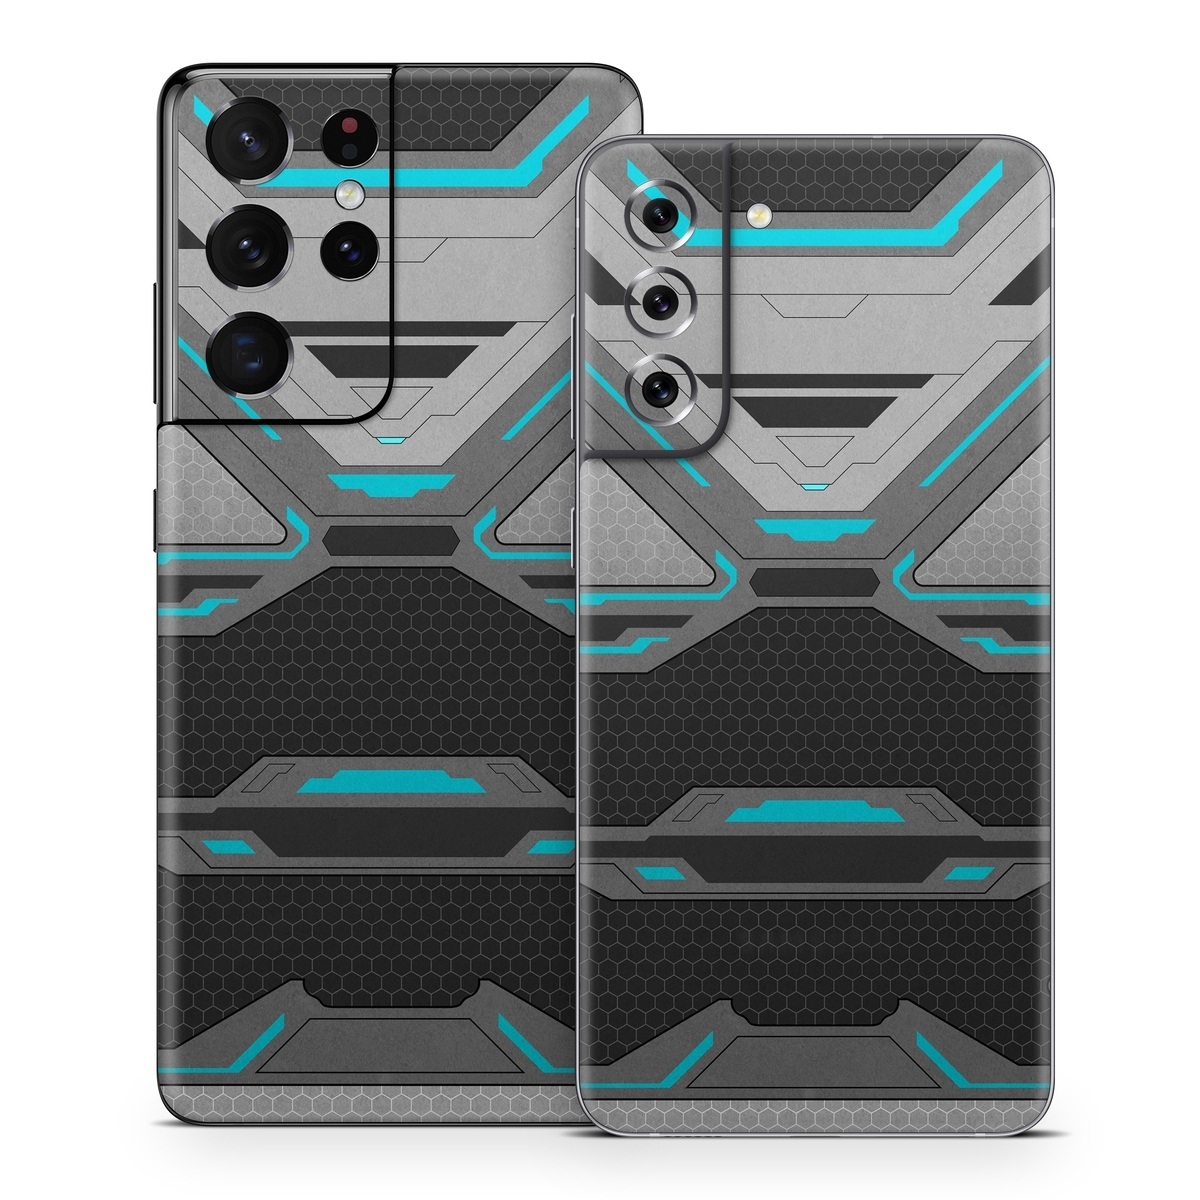 Samsung Galaxy S21 Series Skin design of Blue, Turquoise, Pattern, Teal, Symmetry, Design, Line, Automotive design, Font, with black, gray, blue colors